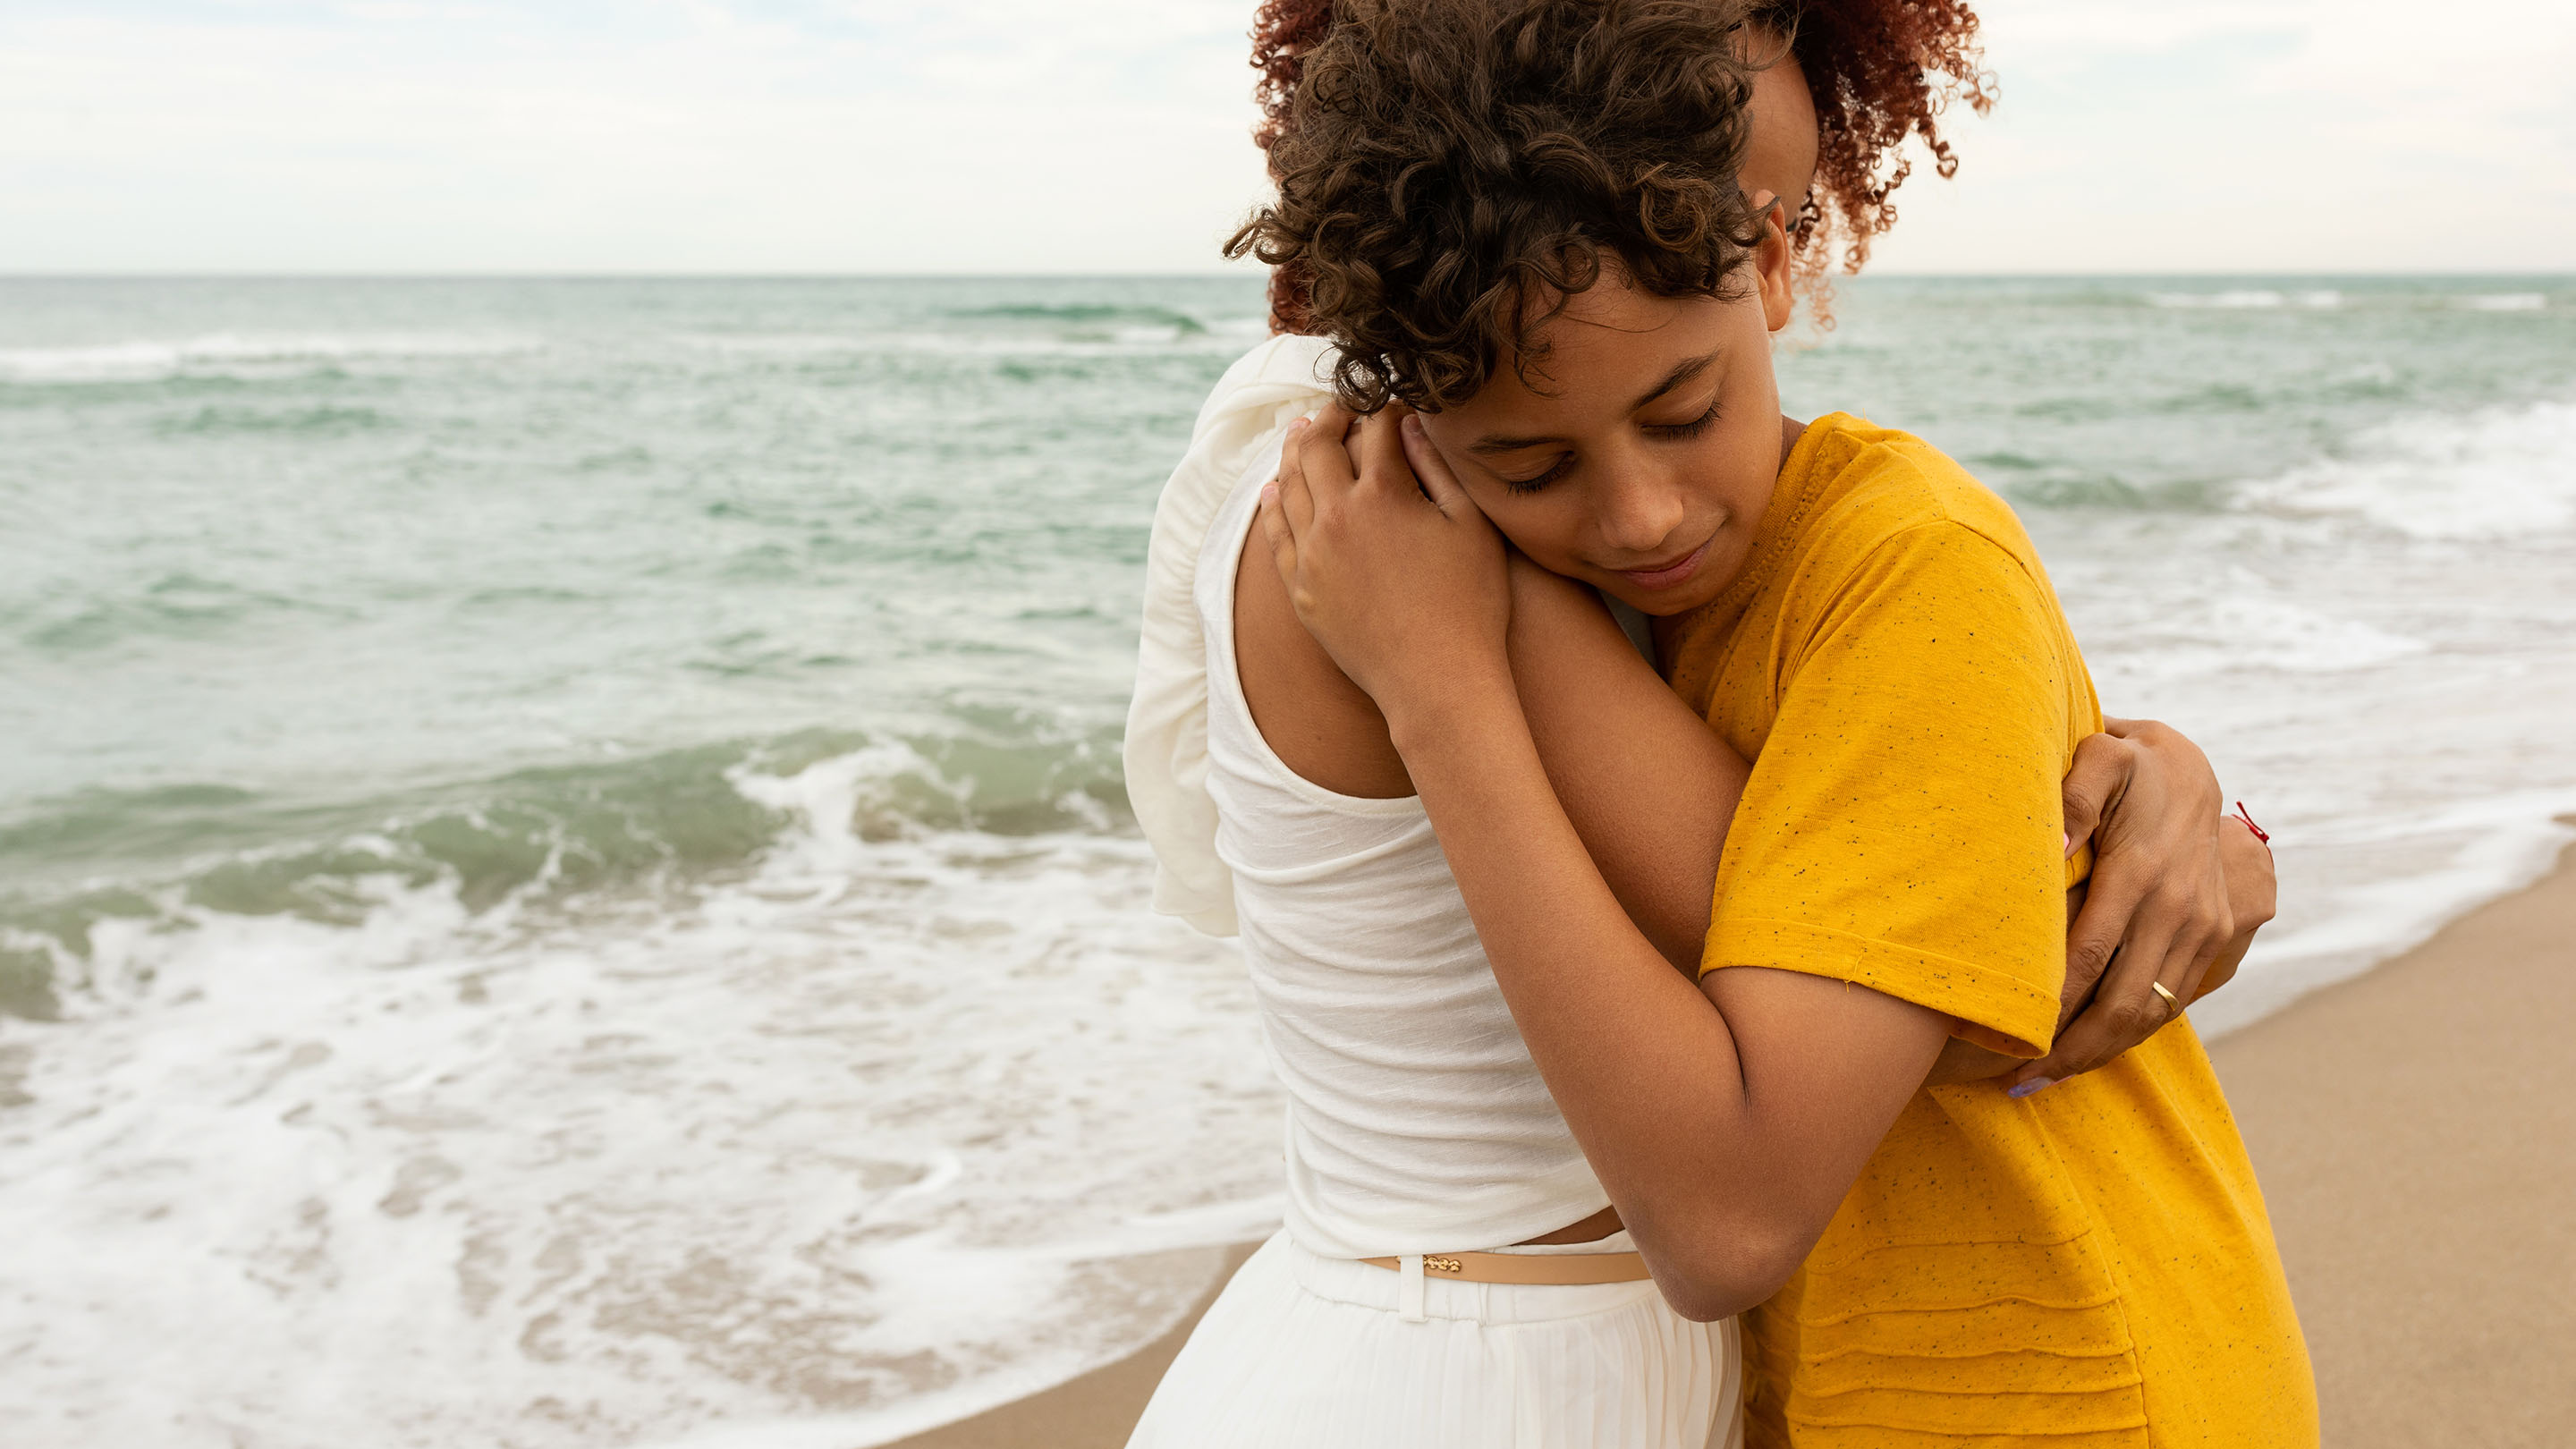 Adult and child hugging on the beach